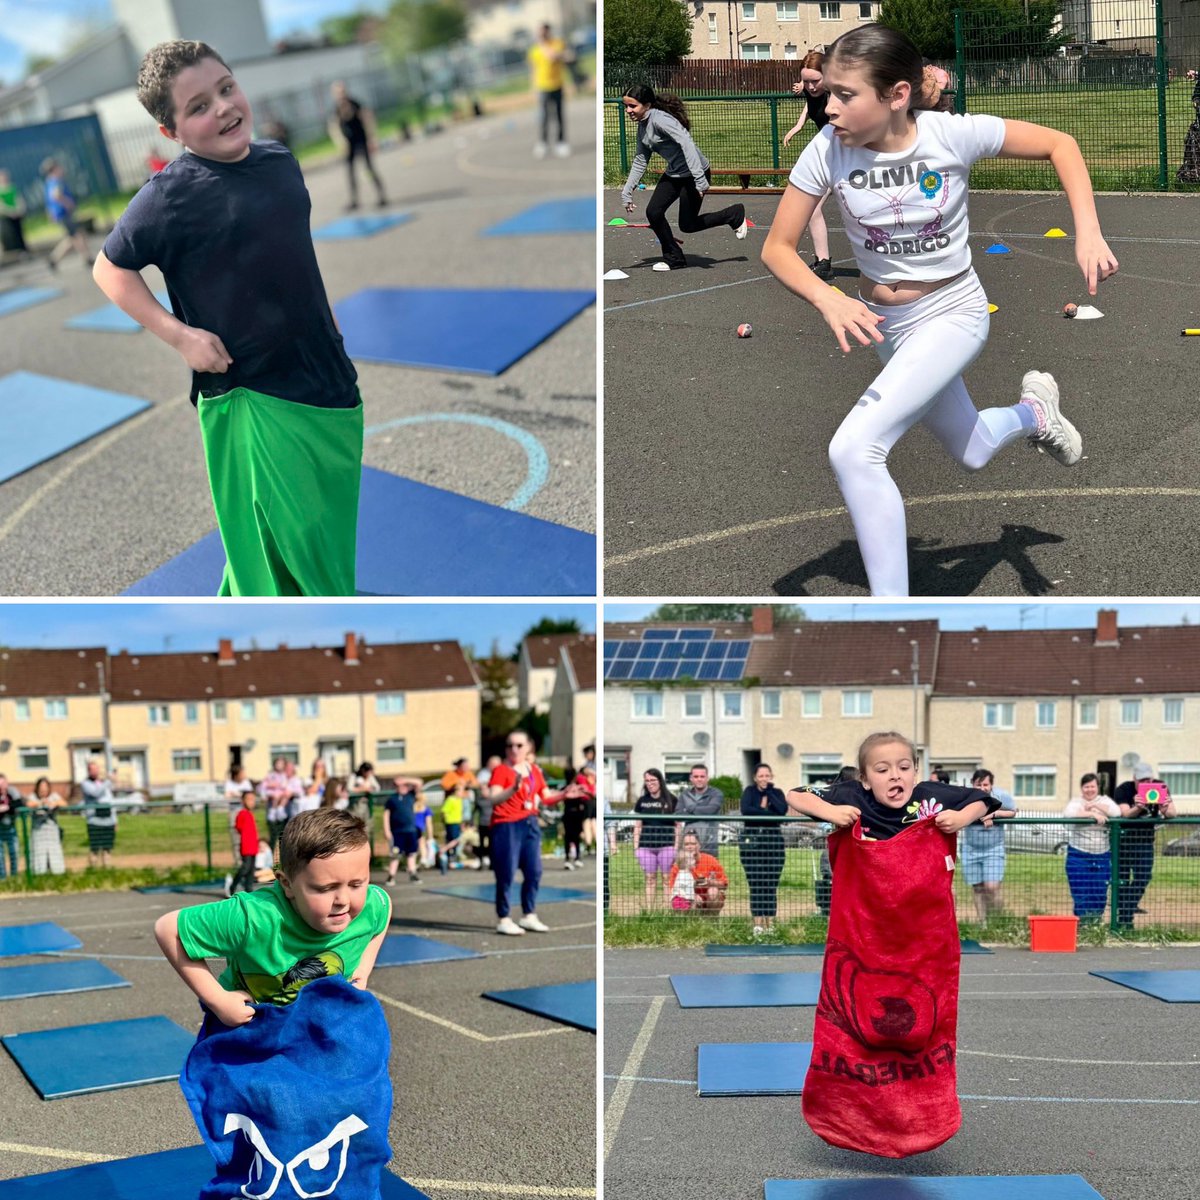 SPORTS DAY 🏆🏀⚽️🎾
What an amazing day to finish off our health week. Well done to all of our pupils for taking part! We’d like to give a huge thanks to our families for coming along to support and also for joining in on the action! 📸💙